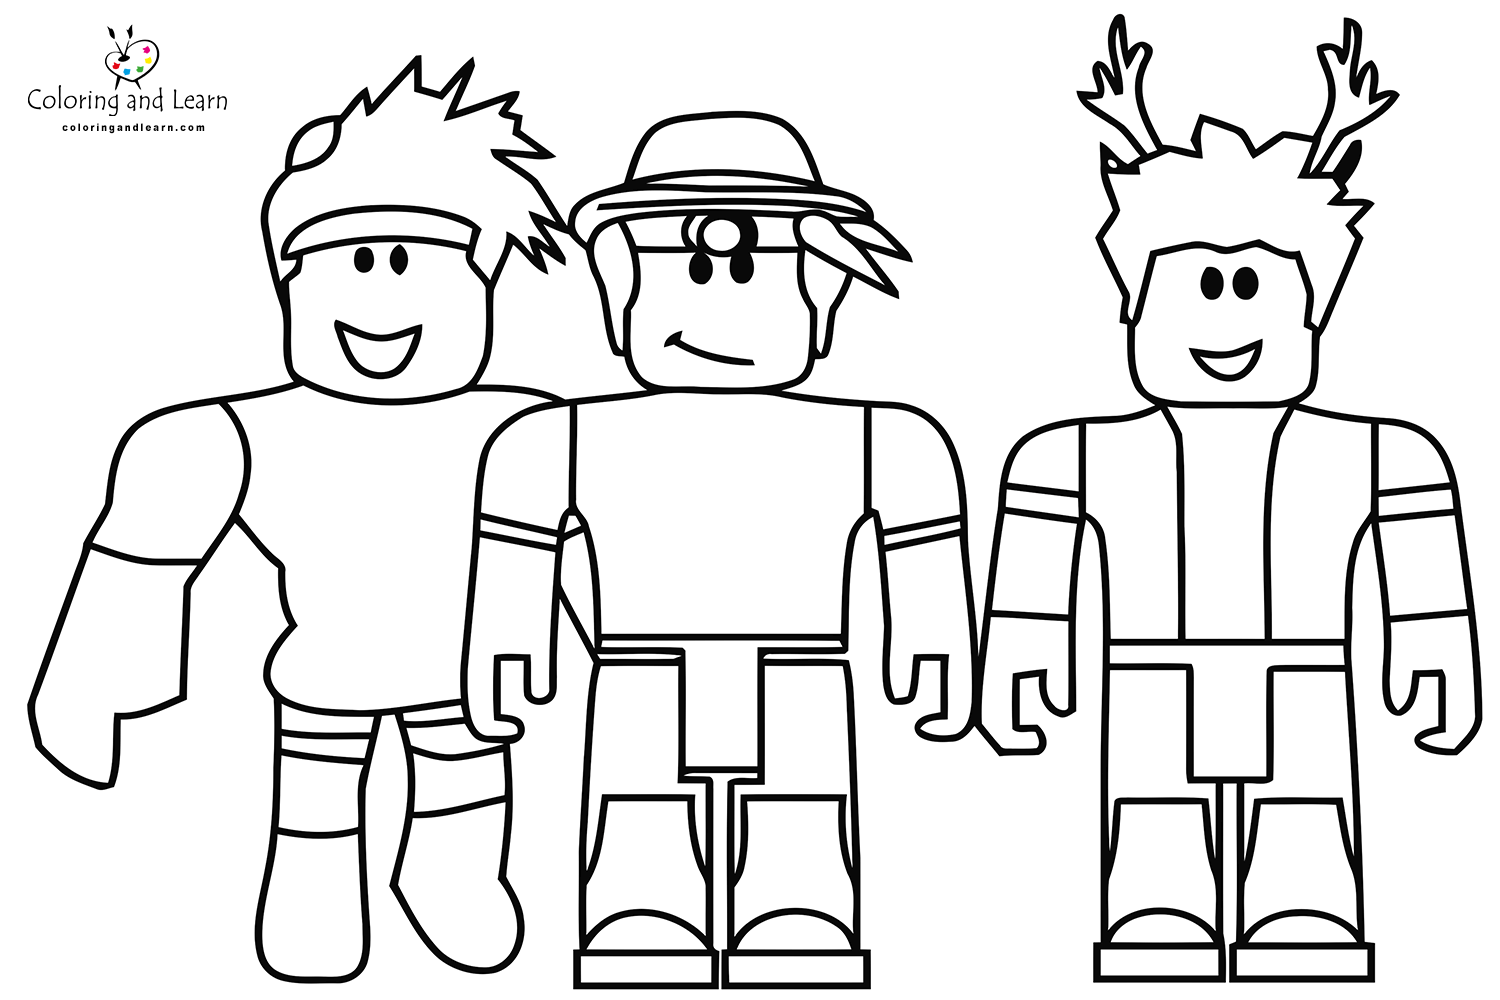 New Roblox Logo Generation V Coloring Pages  Coloring pages to print,  Coloring pages, Cartoon coloring pages